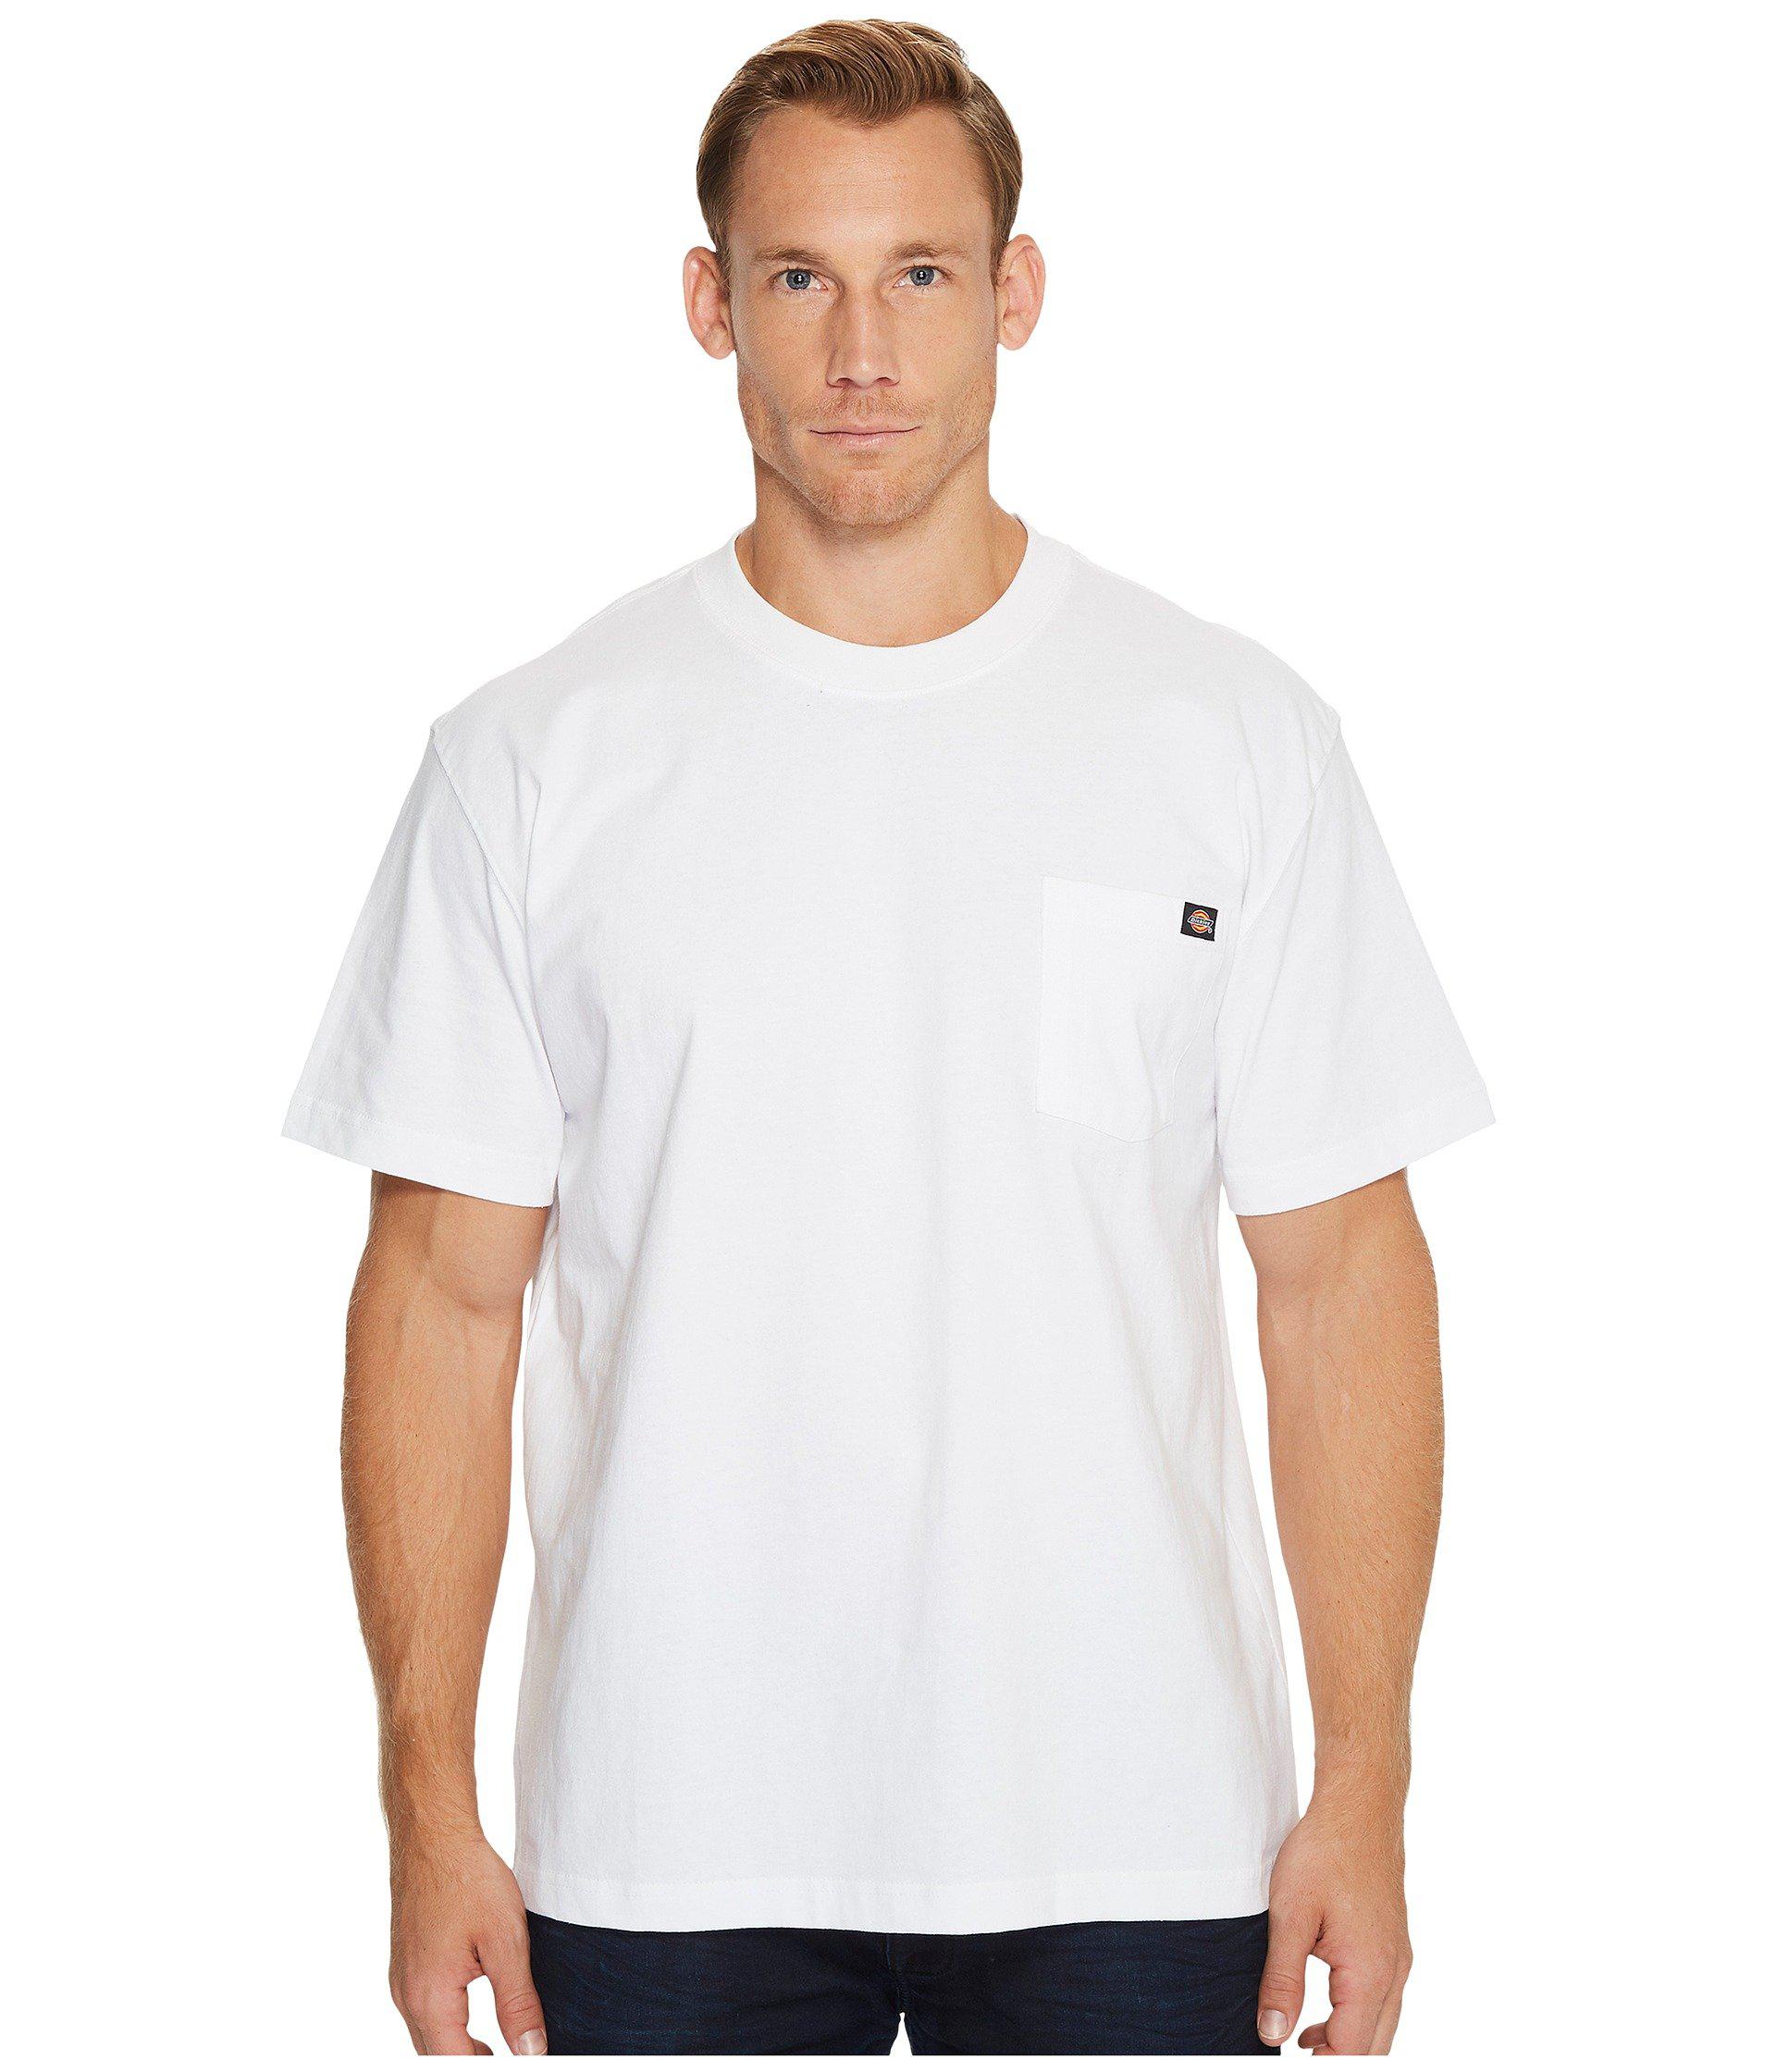 Dickies Cotton Heavyweight Crew Neck Tee in White for Men - Lyst